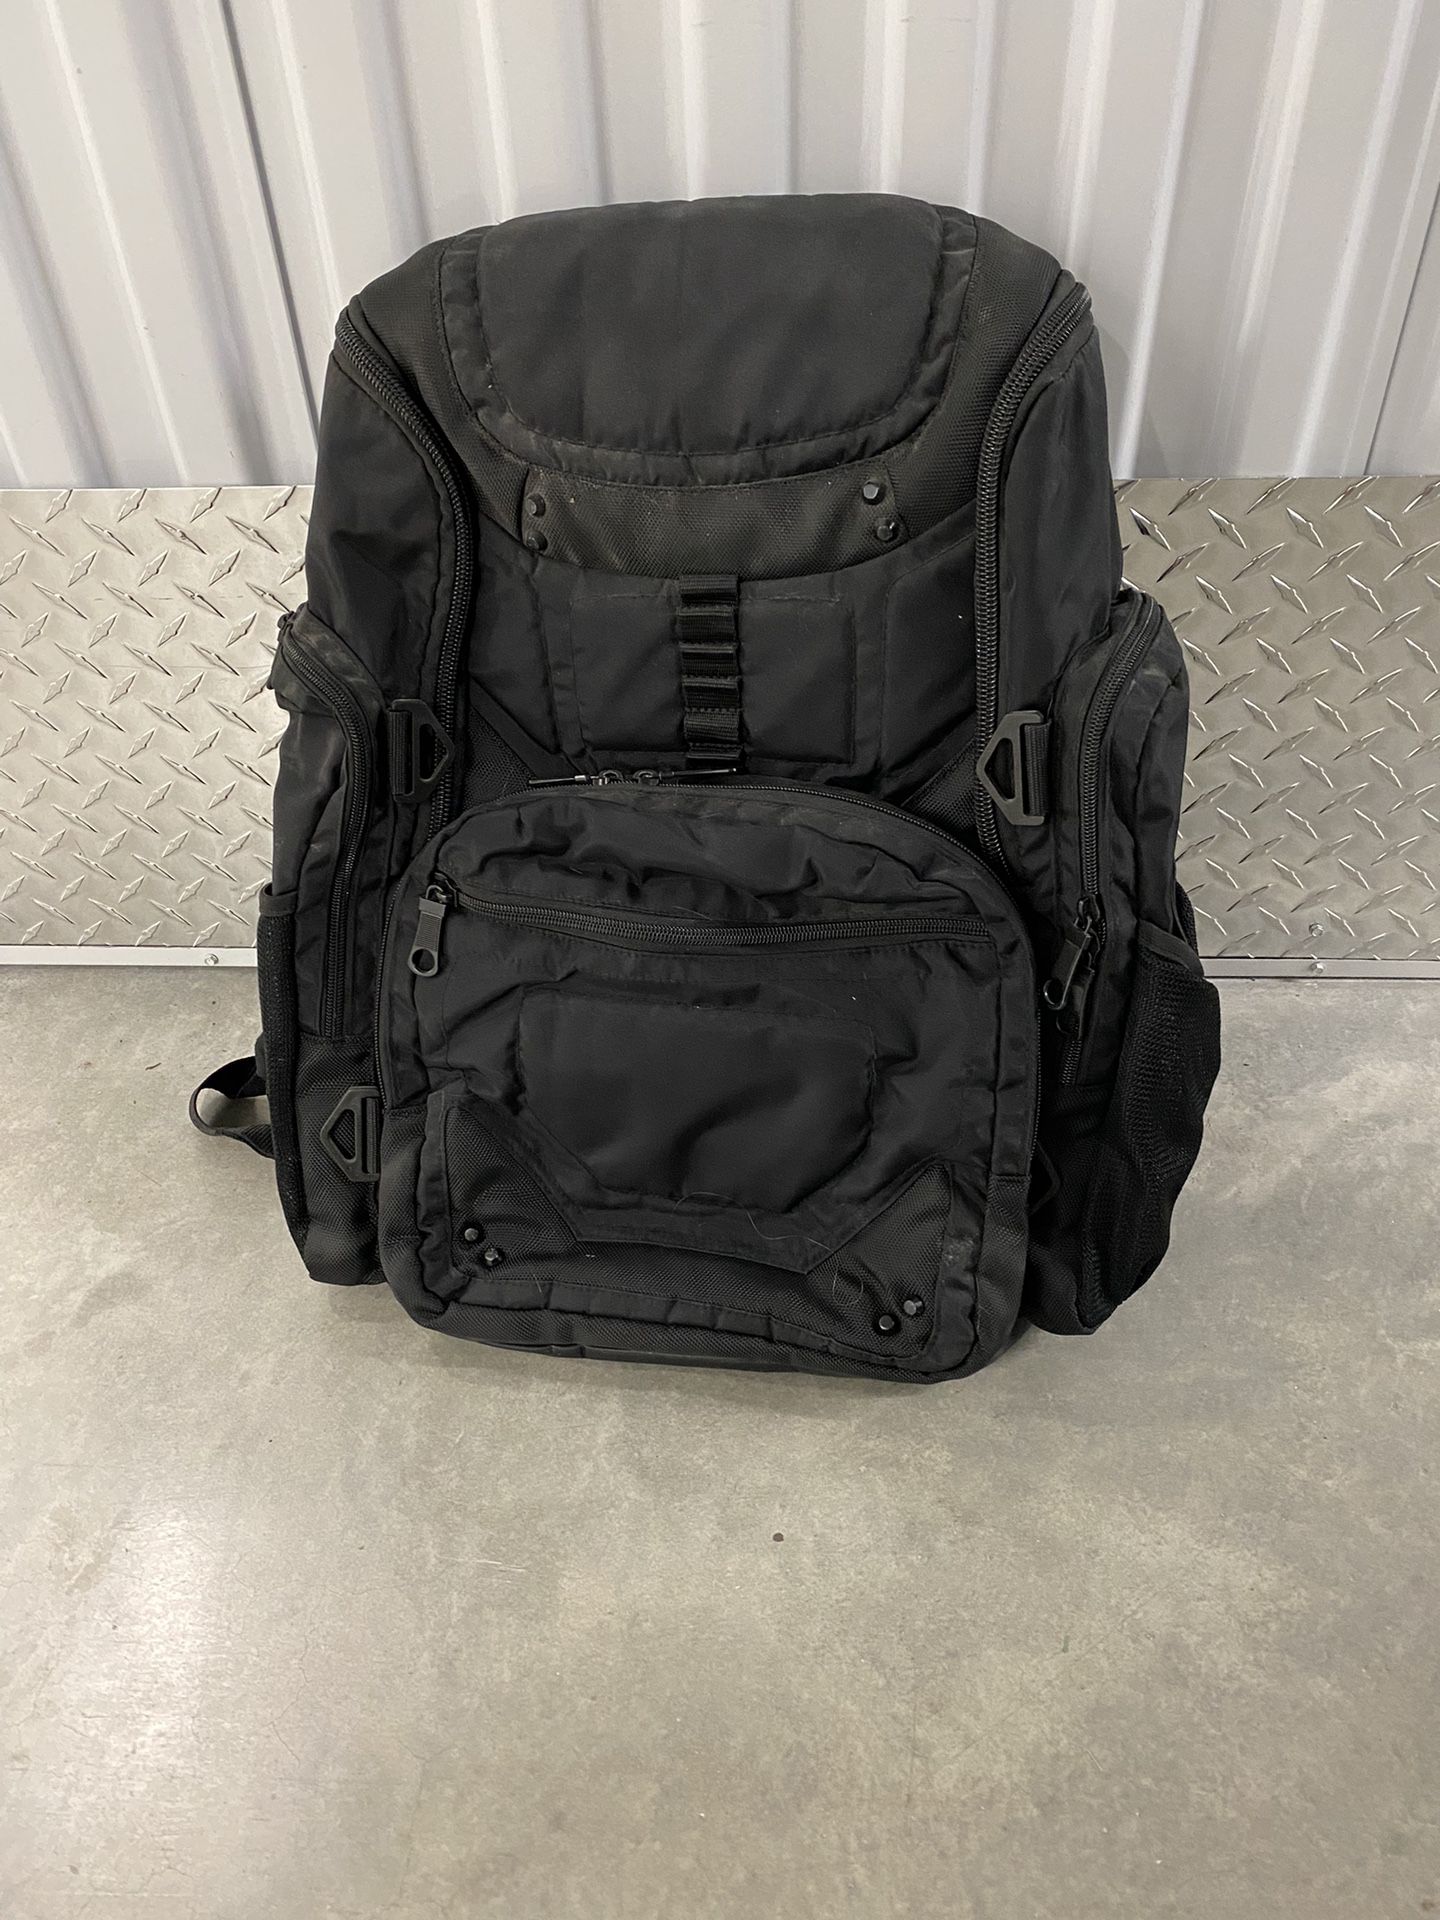 17inch Laptop Backpack